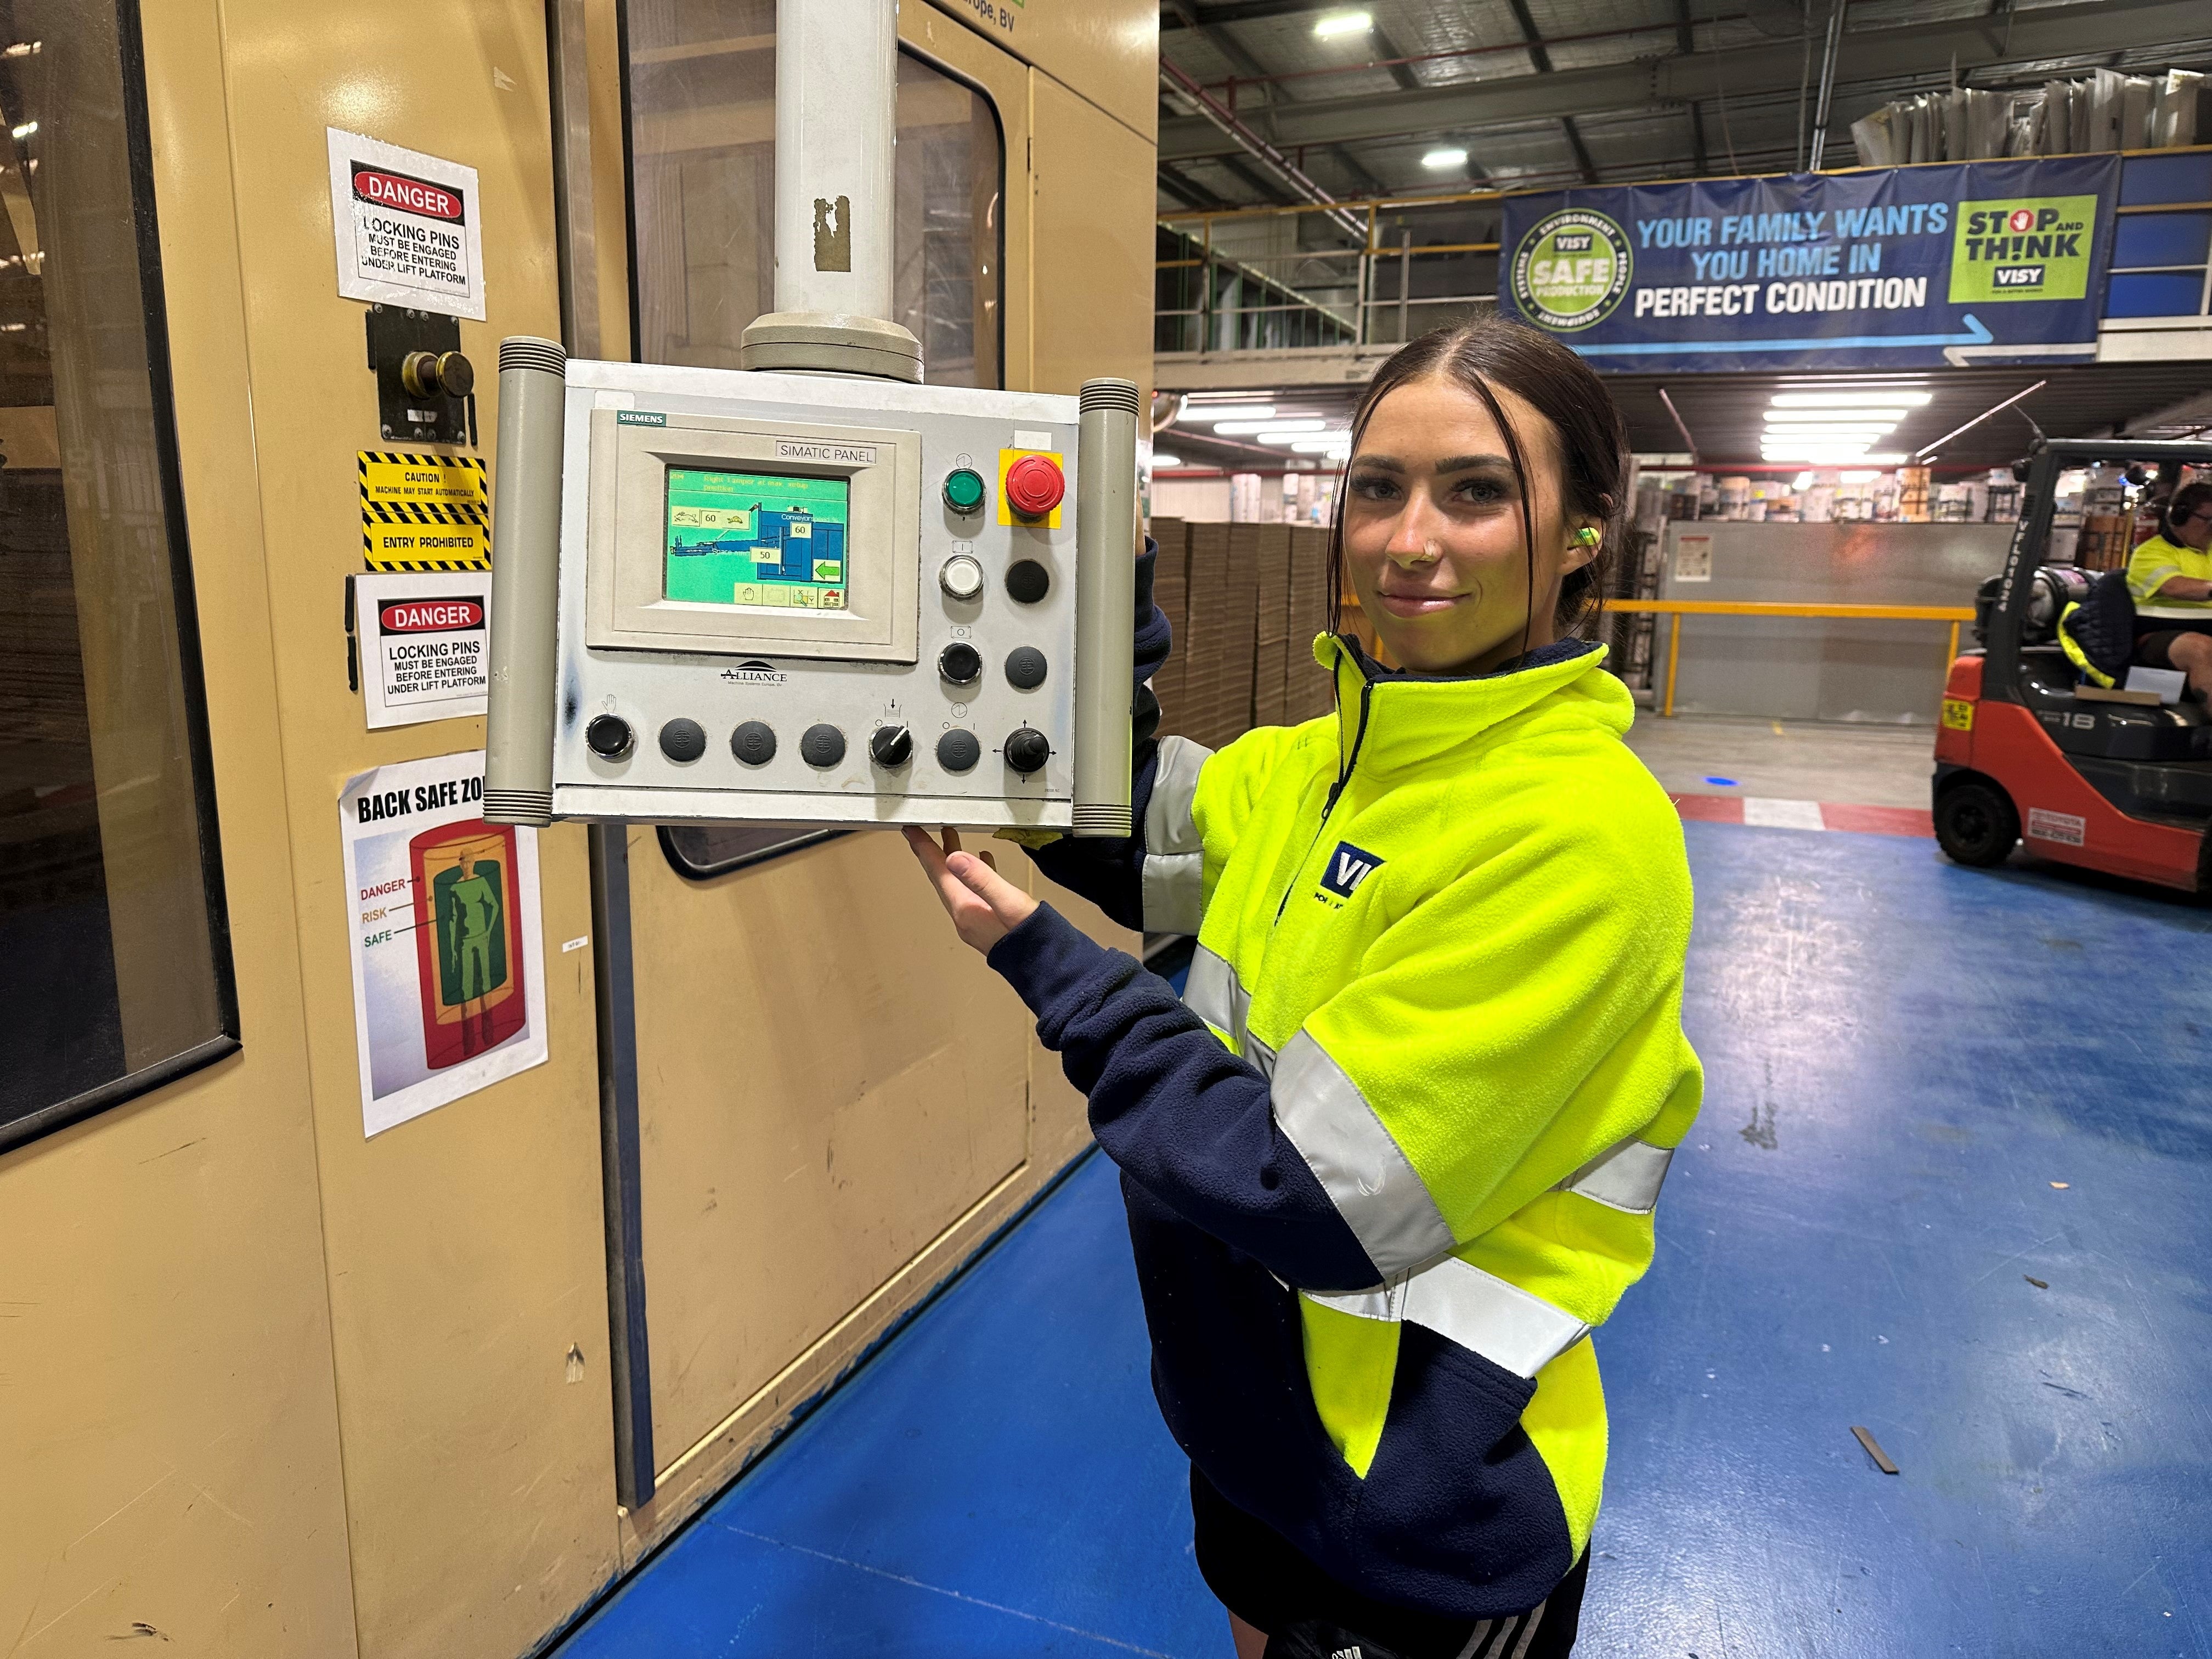 Woman with brown hair in yellow high visibility safety jumper smiles at camera holding a control panel